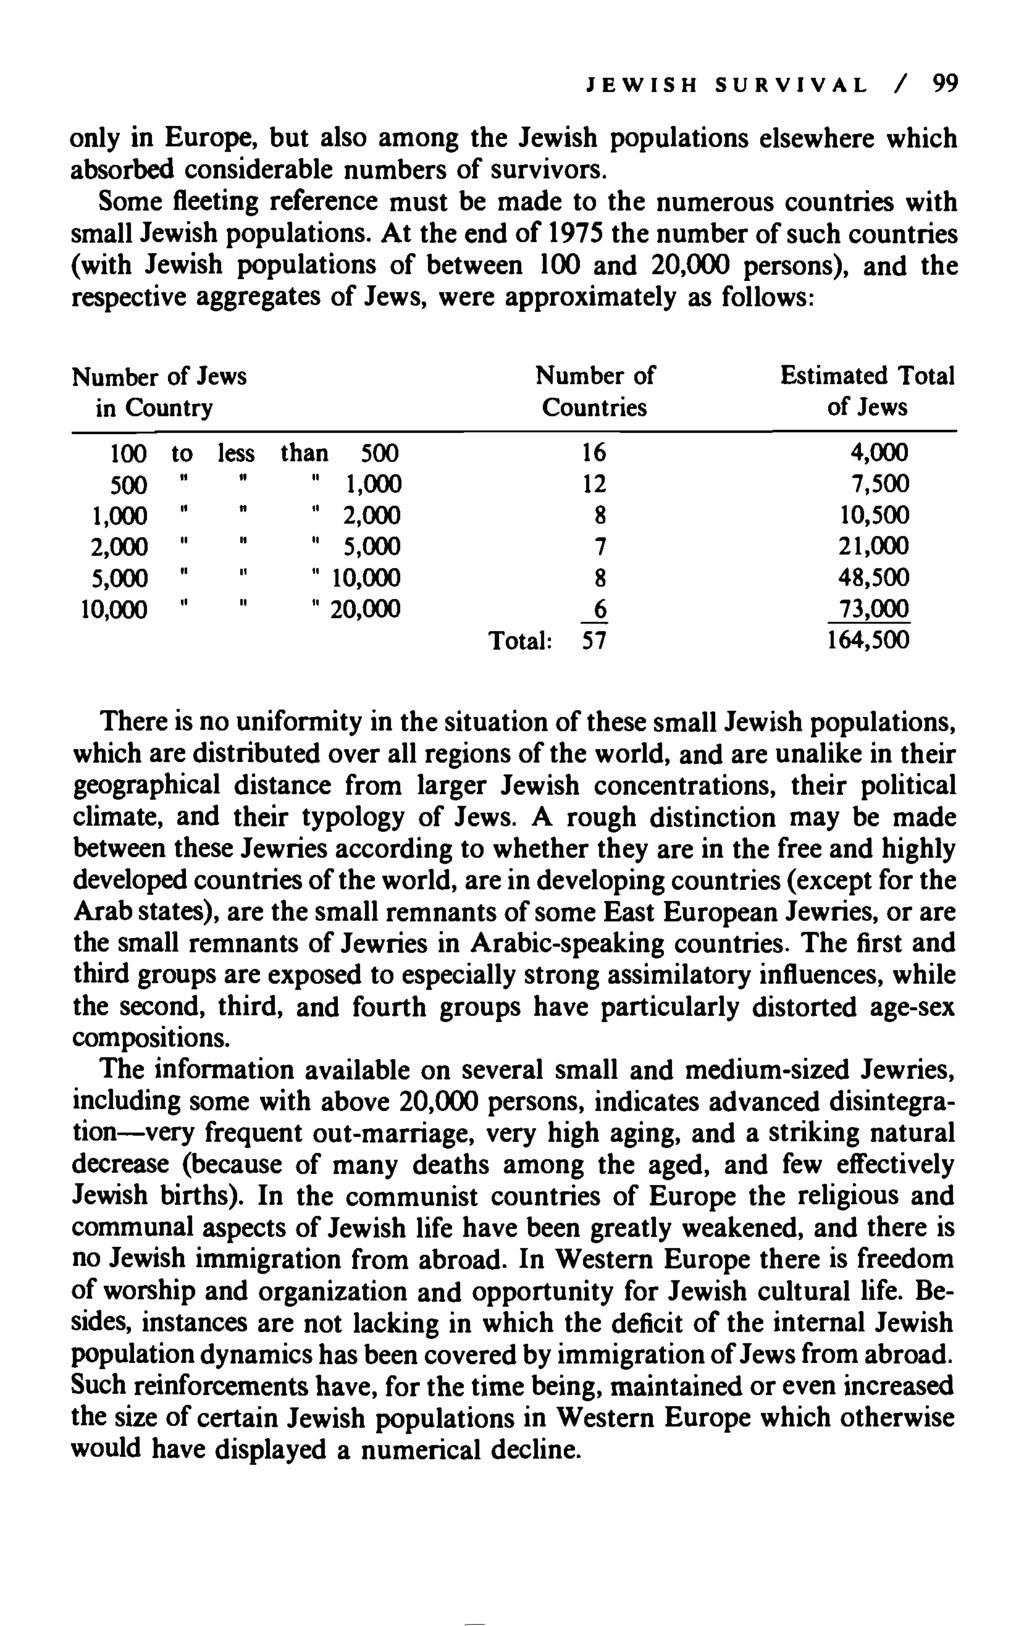 JEWISH SURVIVAL / 99 only in Europe, but also among the Jewish populations elsewhere which absorbed considerable numbers of survivors.